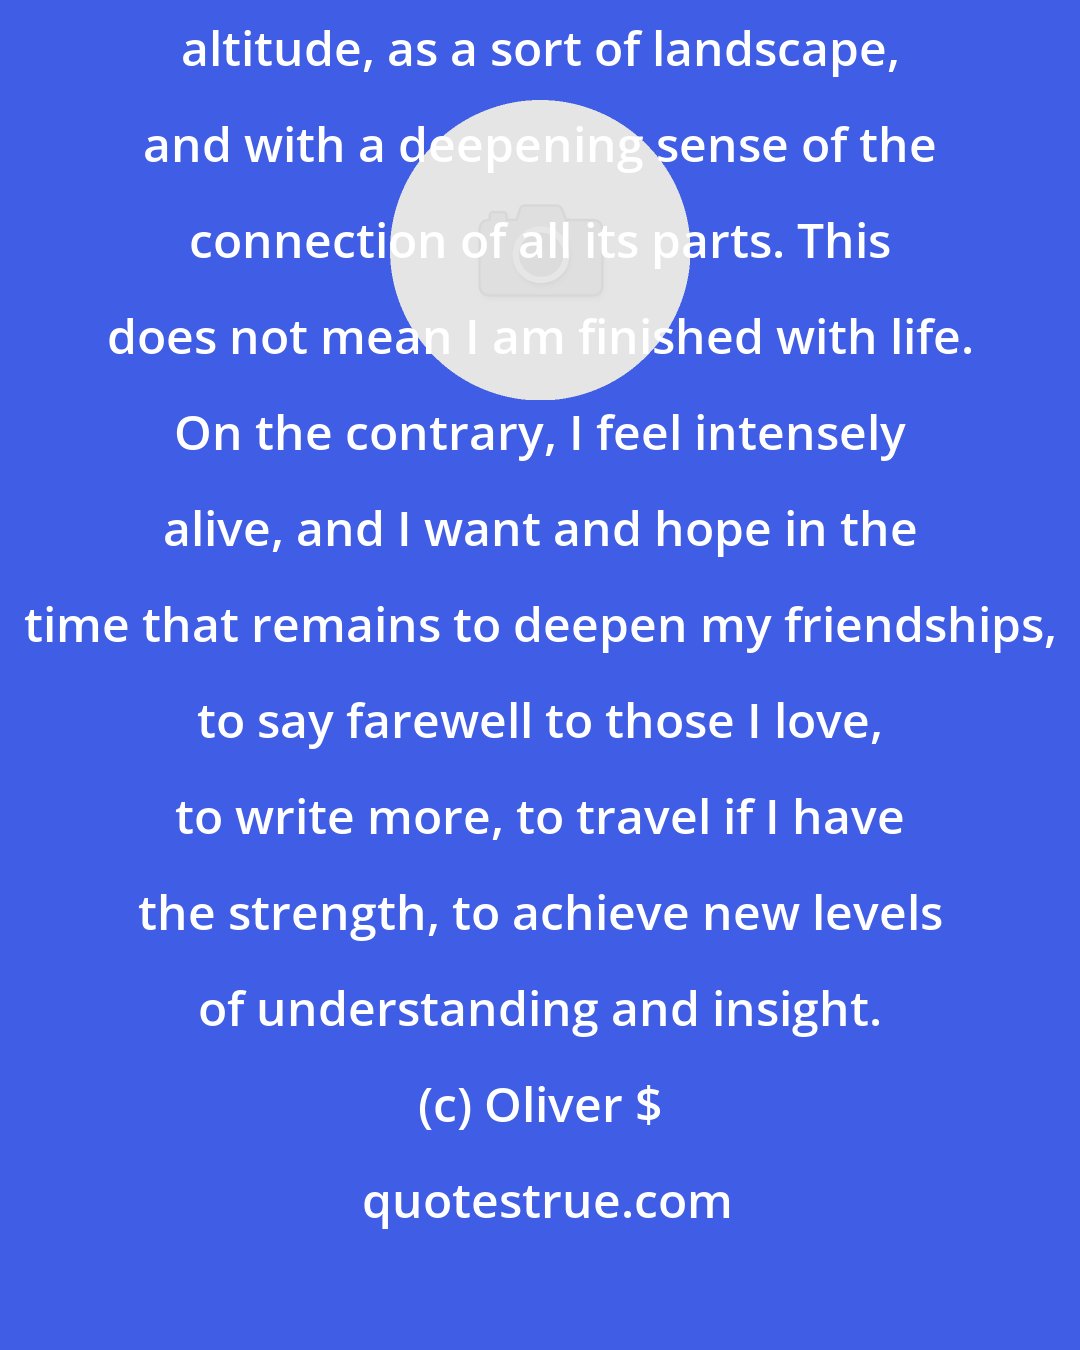 Oliver $: Over the last few days, I have been able to see my life as from a great altitude, as a sort of landscape, and with a deepening sense of the connection of all its parts. This does not mean I am finished with life. On the contrary, I feel intensely alive, and I want and hope in the time that remains to deepen my friendships, to say farewell to those I love, to write more, to travel if I have the strength, to achieve new levels of understanding and insight.